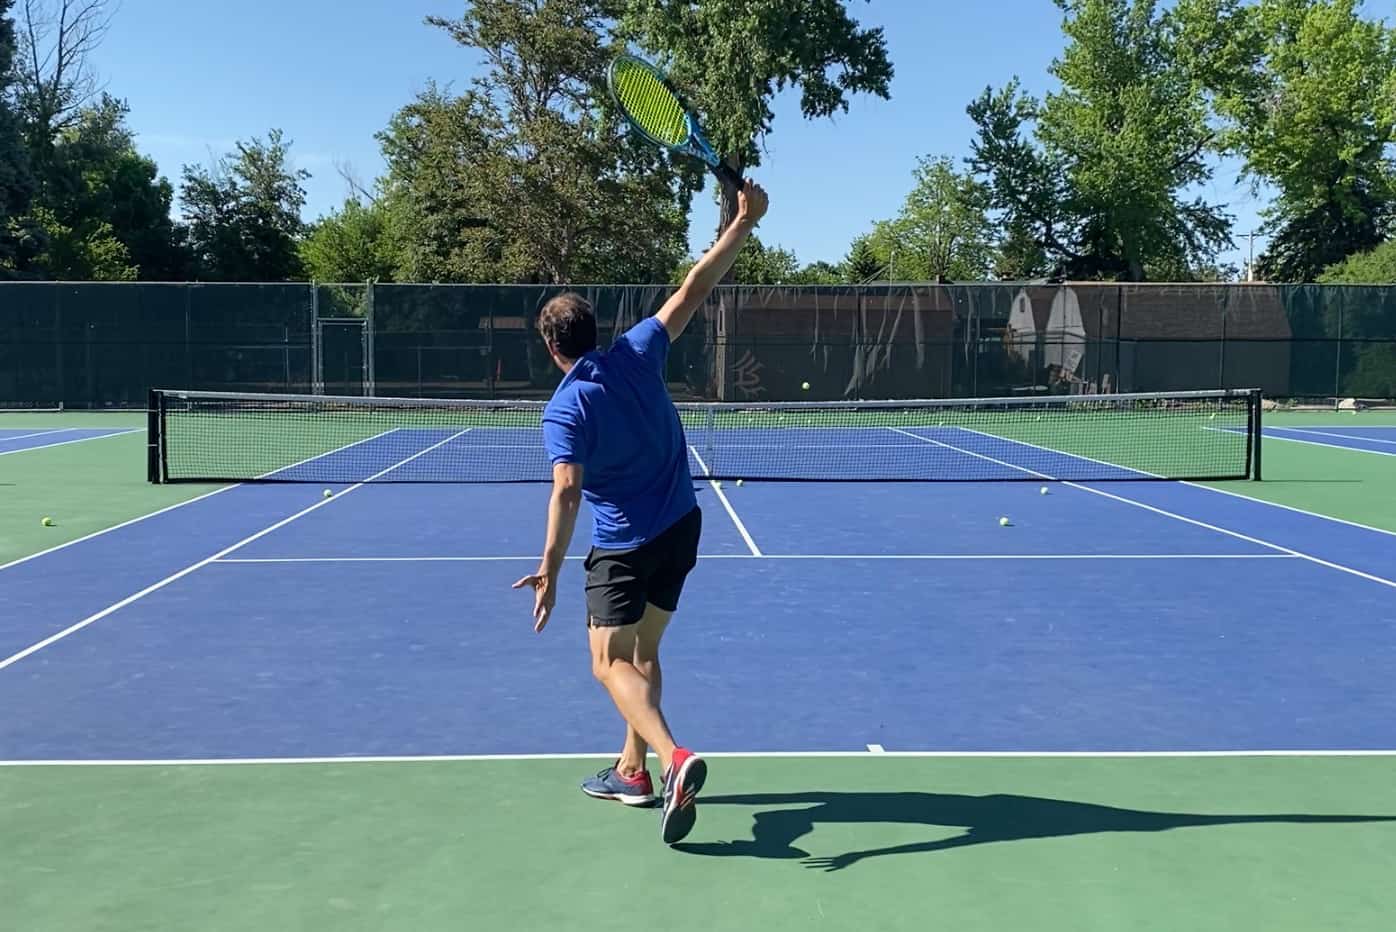 One handed backhand tip